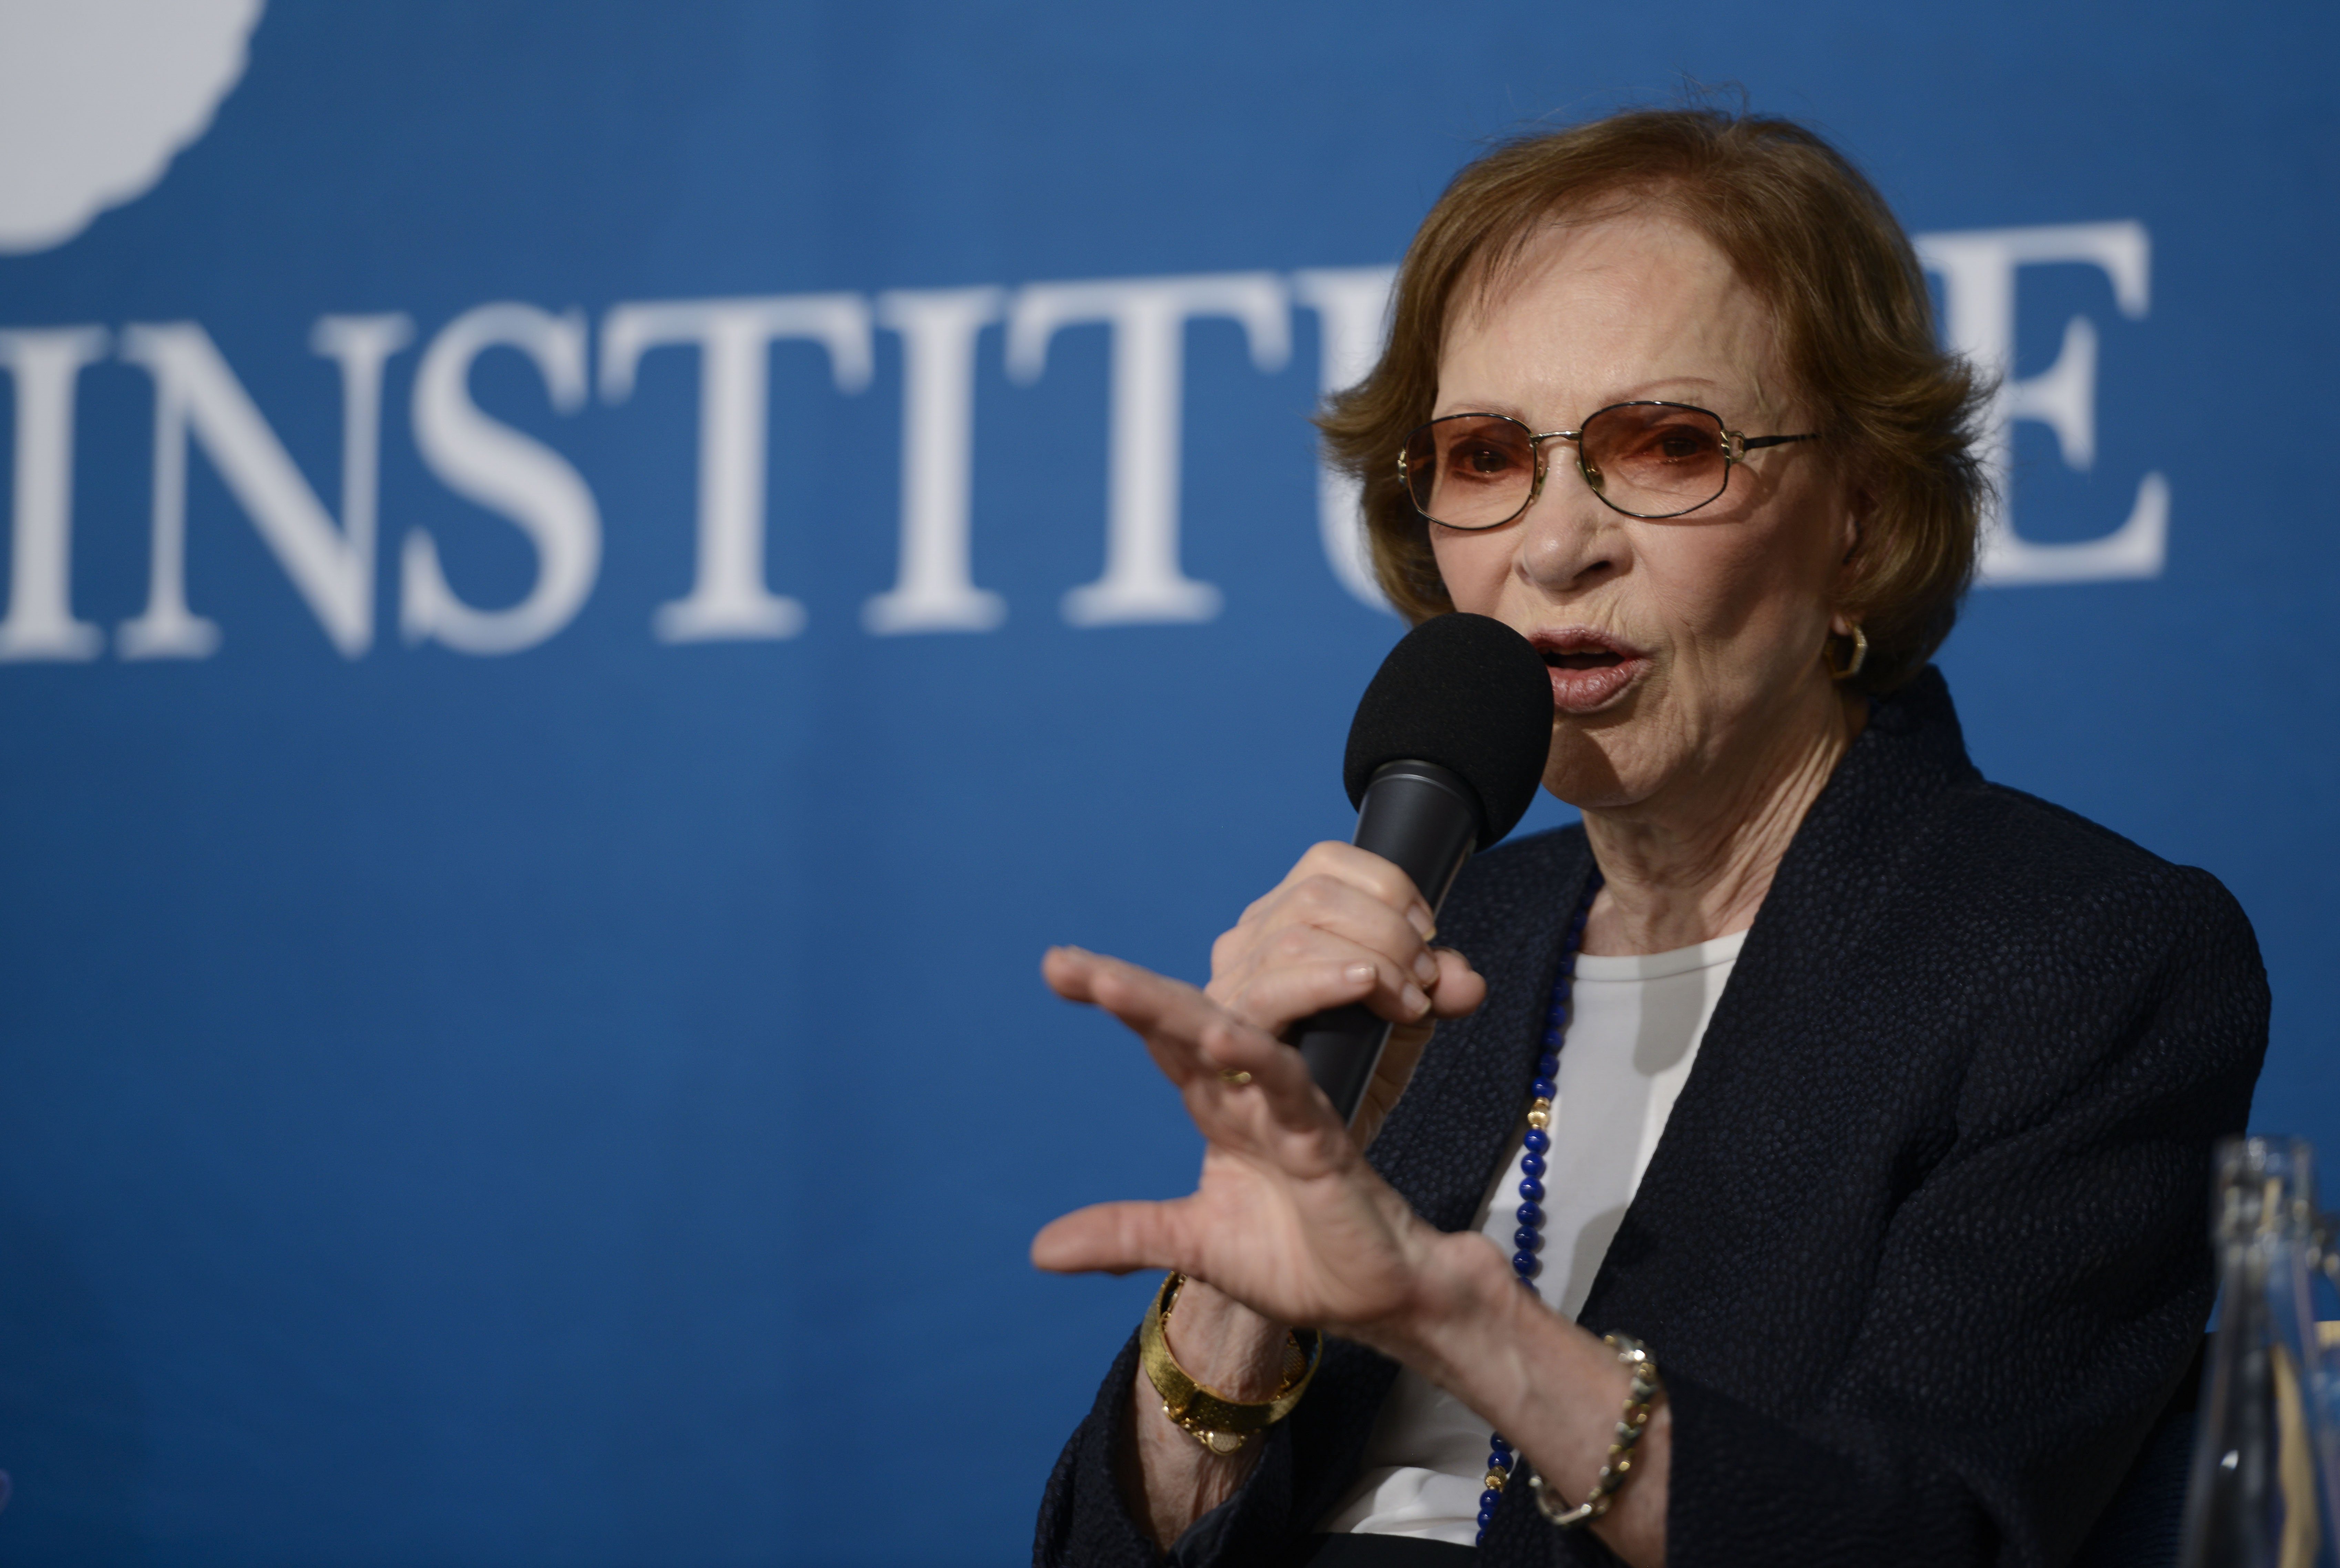 Former First Lady Rosalynn Carter on June 23, 2015 in Aspen, Colorado. | Source: Getty Images